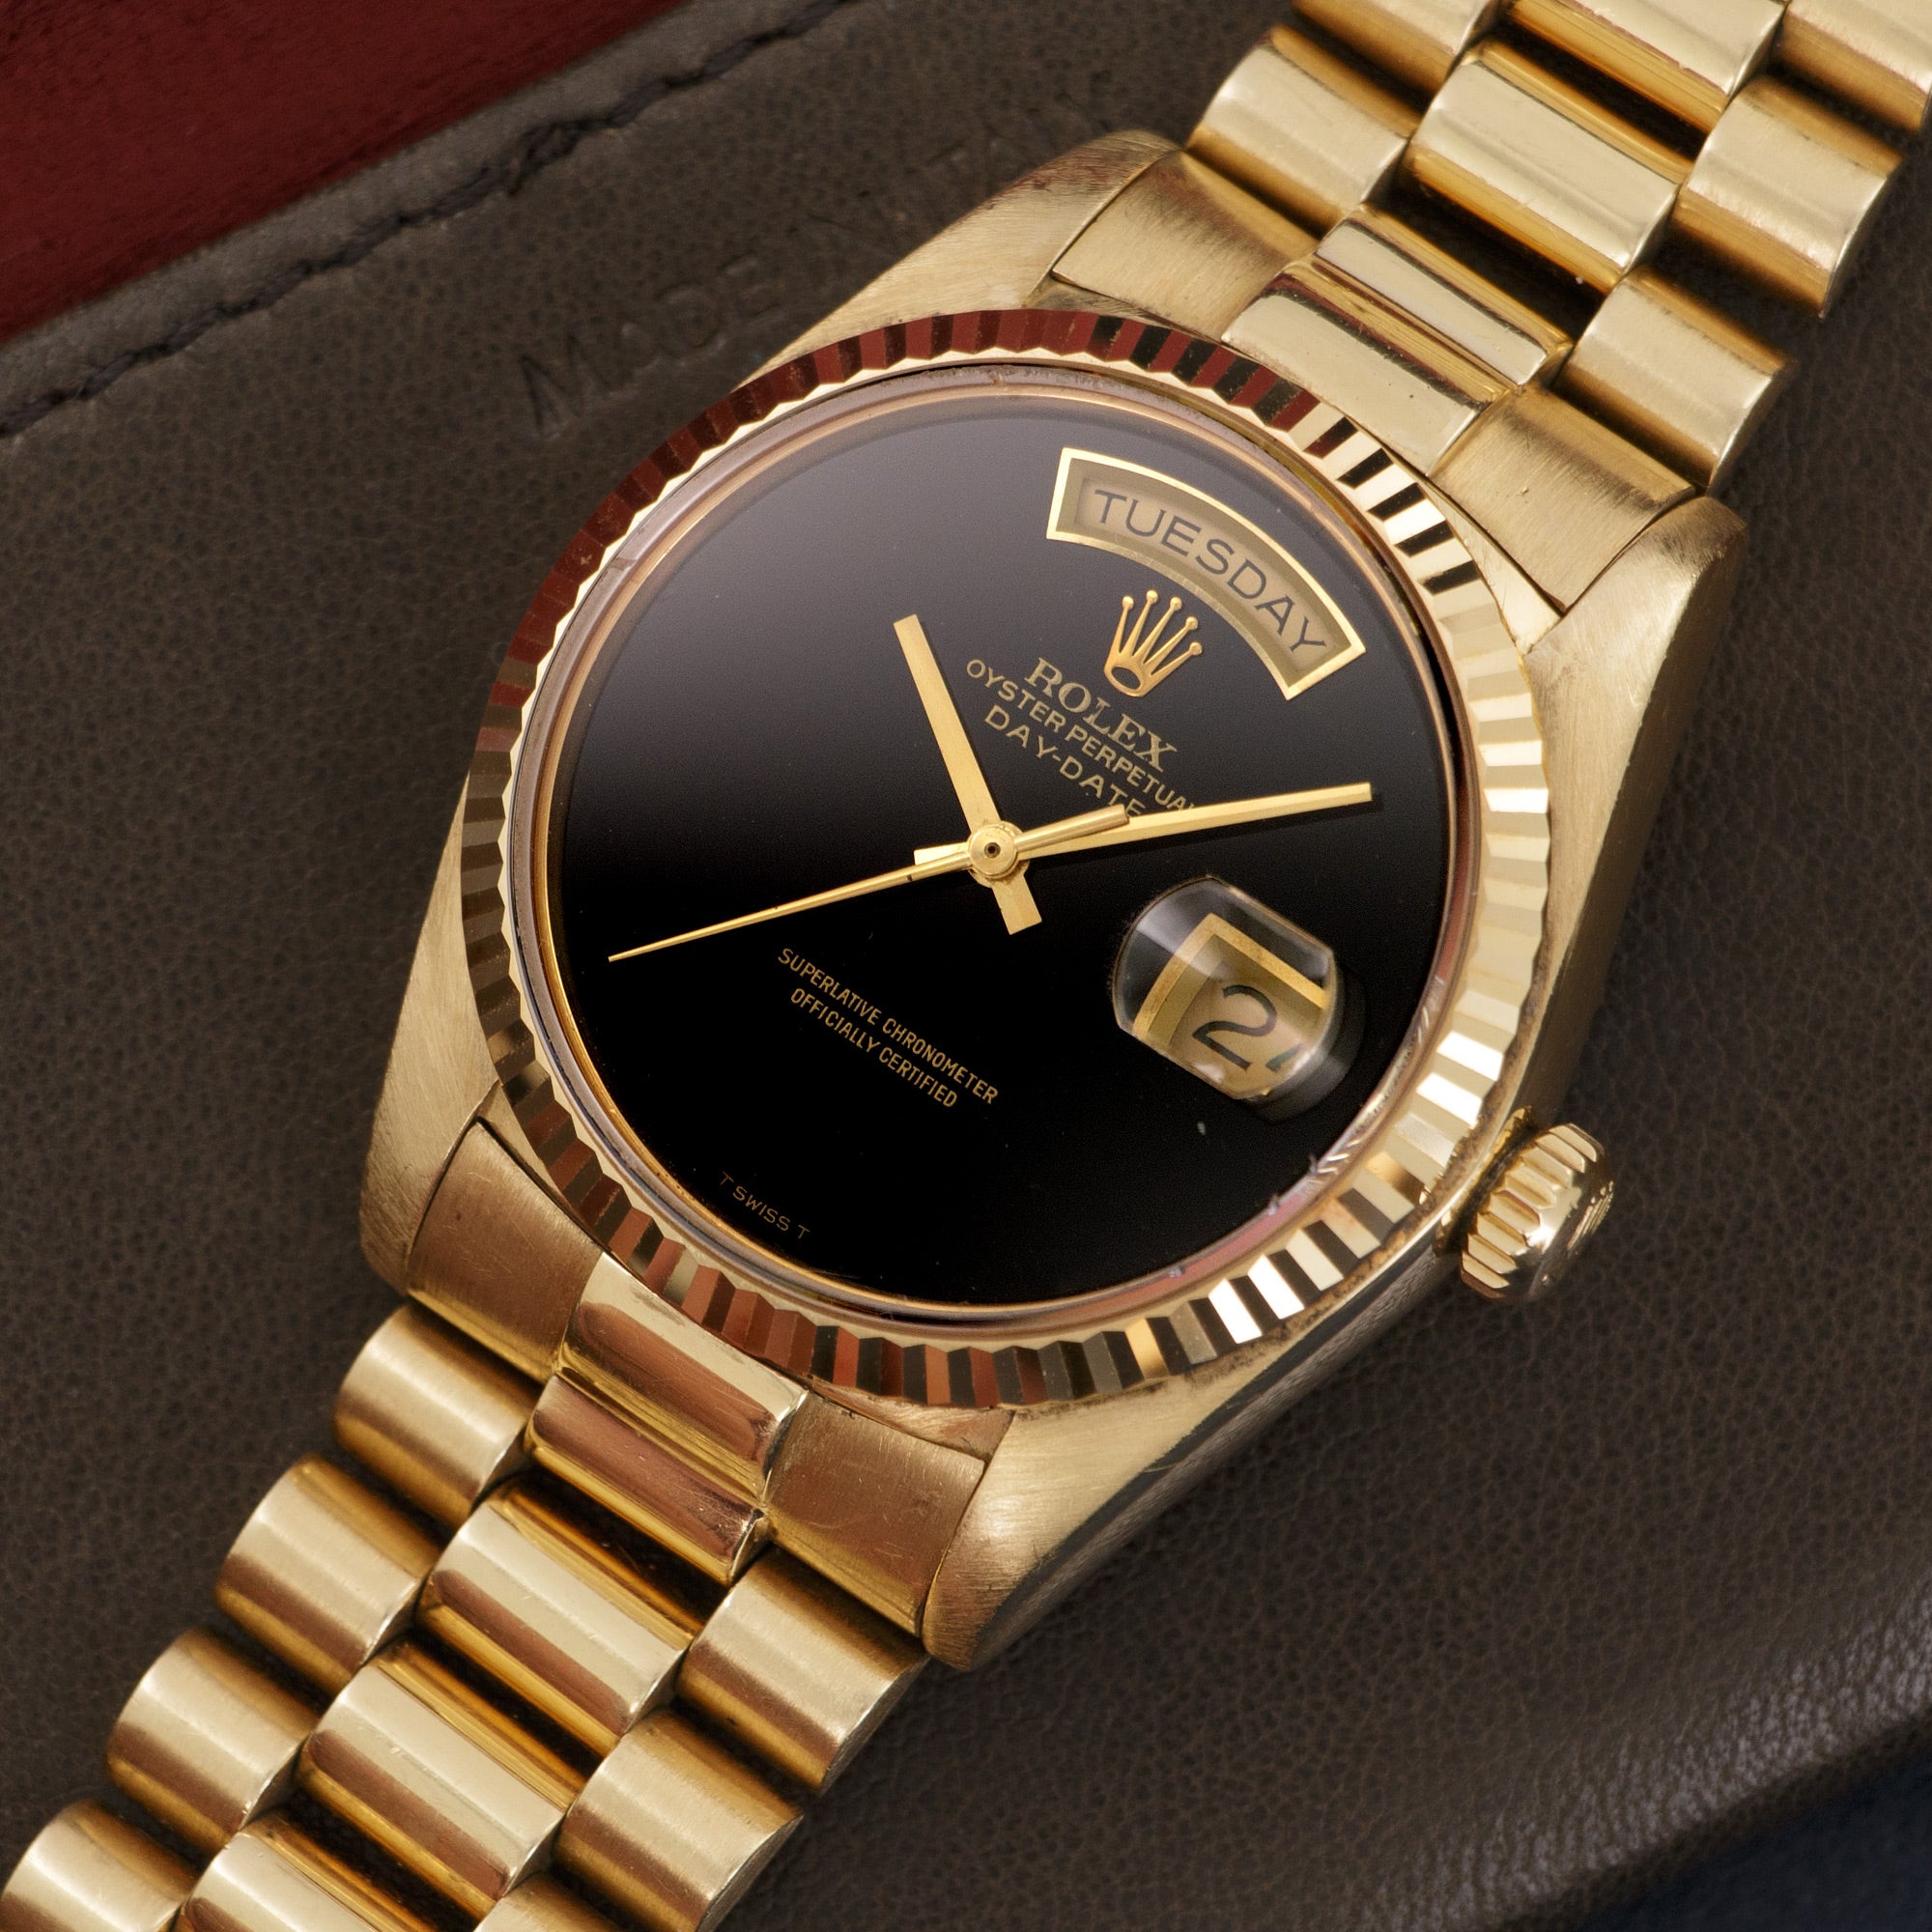 Rolex - Rolex Yellow Gold Day-Date Onyx Dial Watch Ref. 18038 - The Keystone Watches